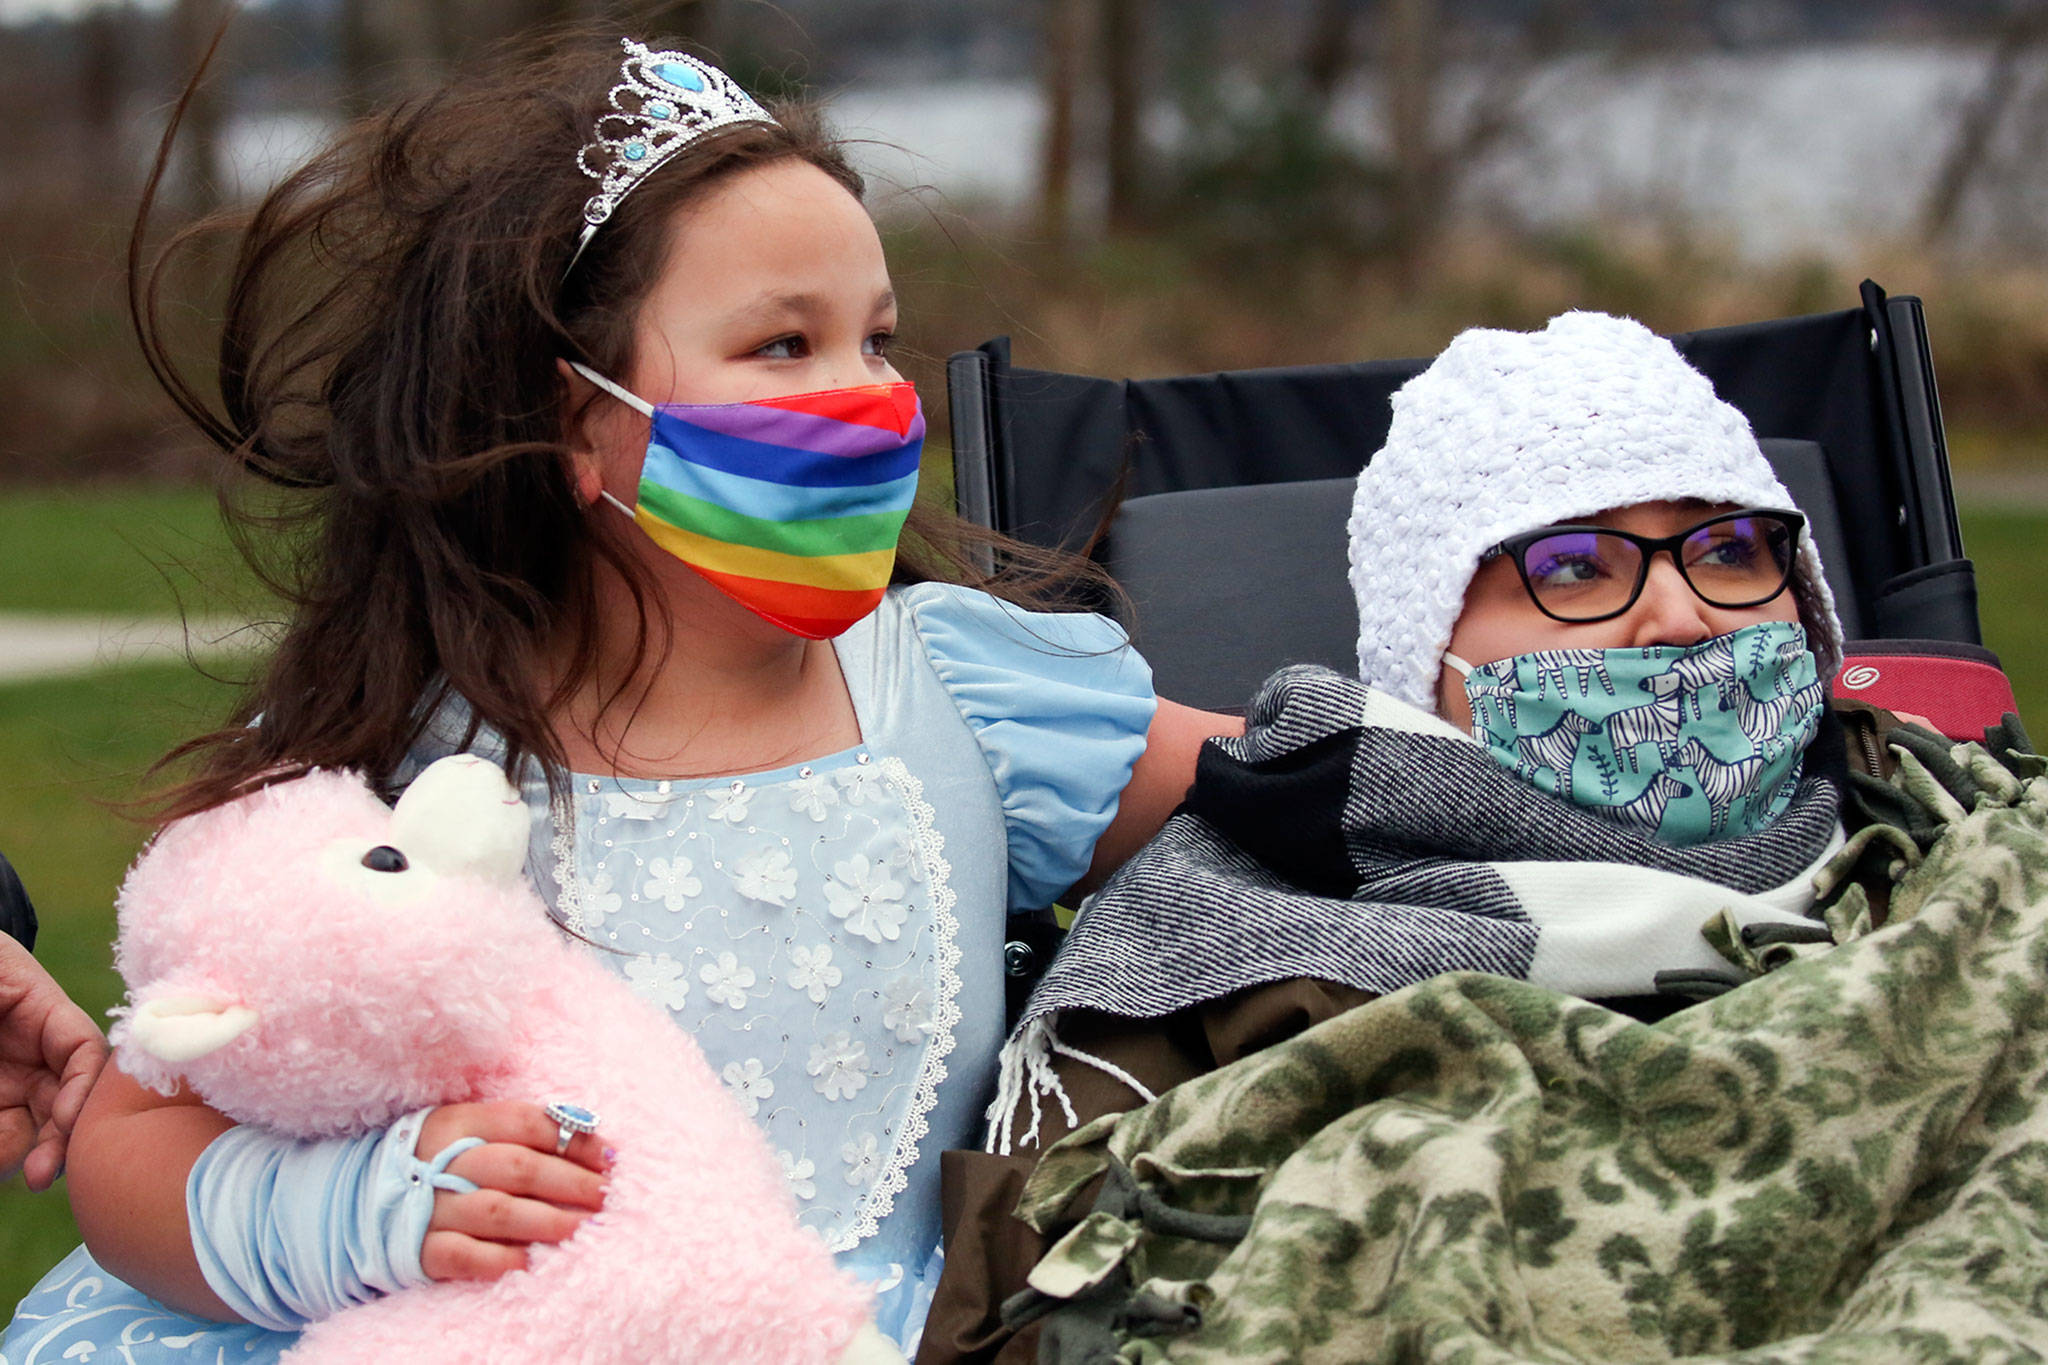 Madelynne Erickson (left) with her mother Bethany Erickson during a fundraiser at Lundeen Park in Lake Stevens on March 6. (Kevin Clark / The Herald)